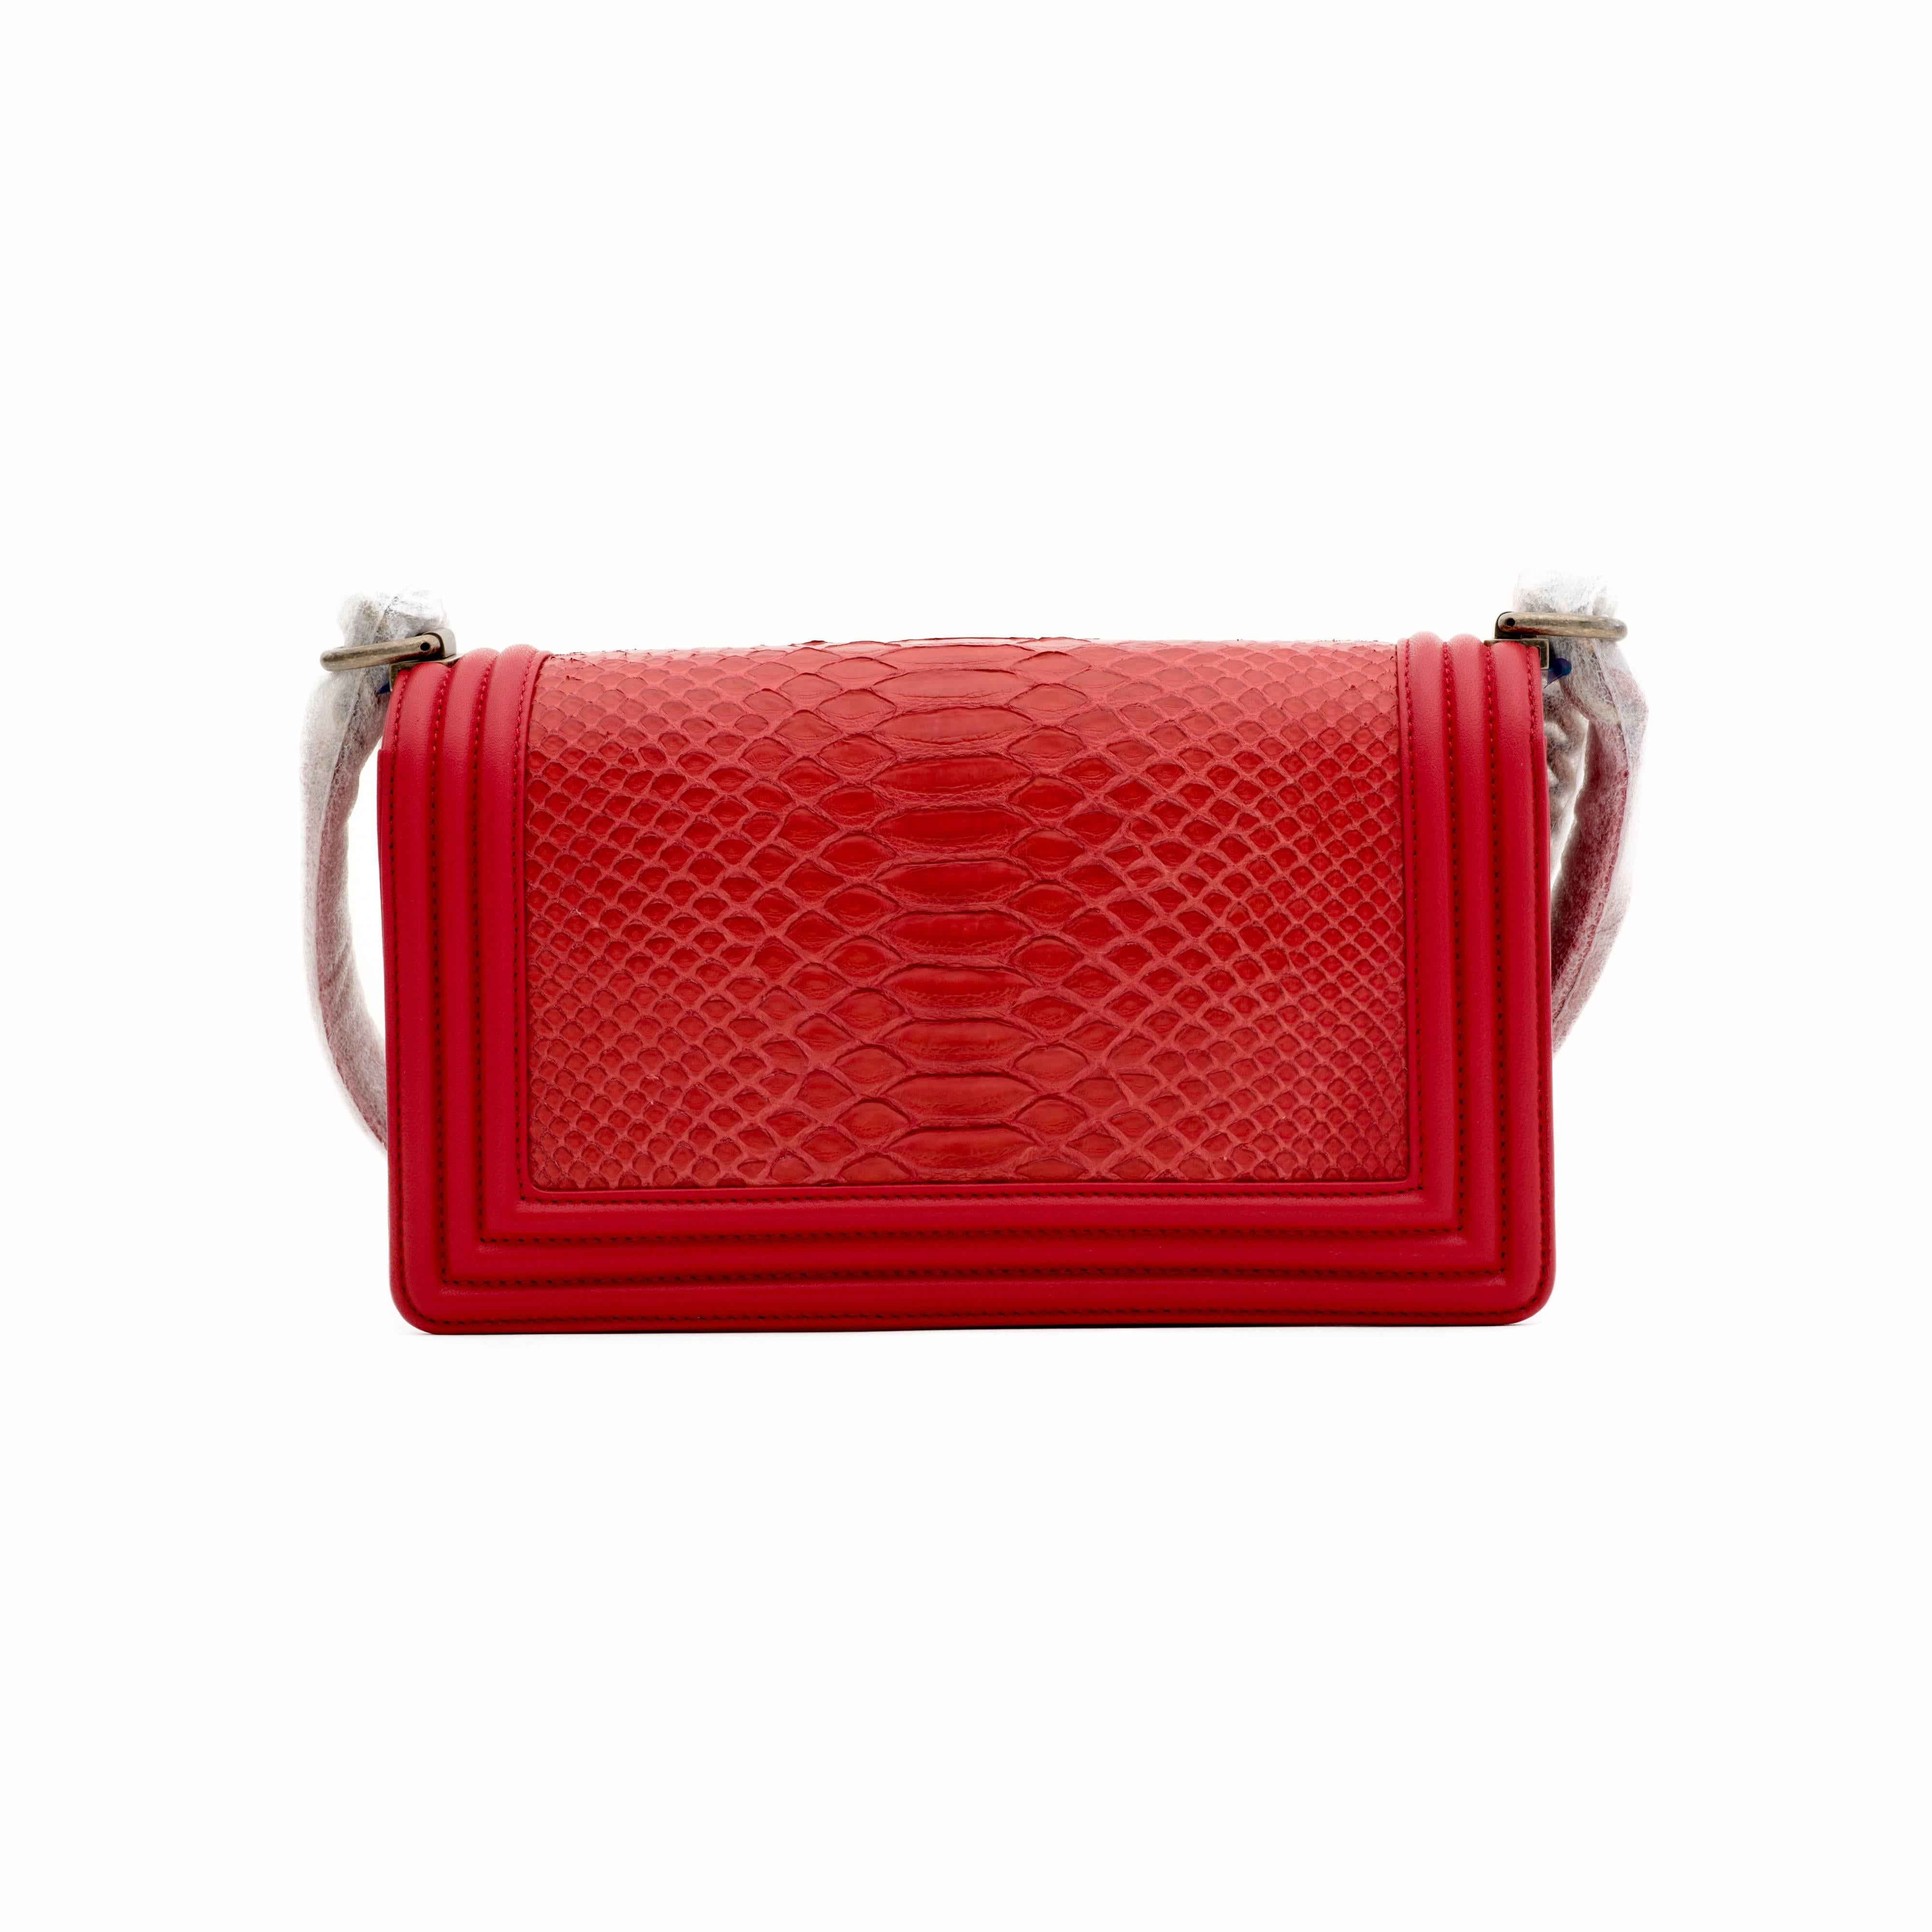 Chanel Medium Boy bag made of red python with calf leather and antique gold tone hardware.
 
This bag features a full front flap with the signature Le Boy CC push lock closure and a chain link, and leather shoulder/crossbody strap.
 
The